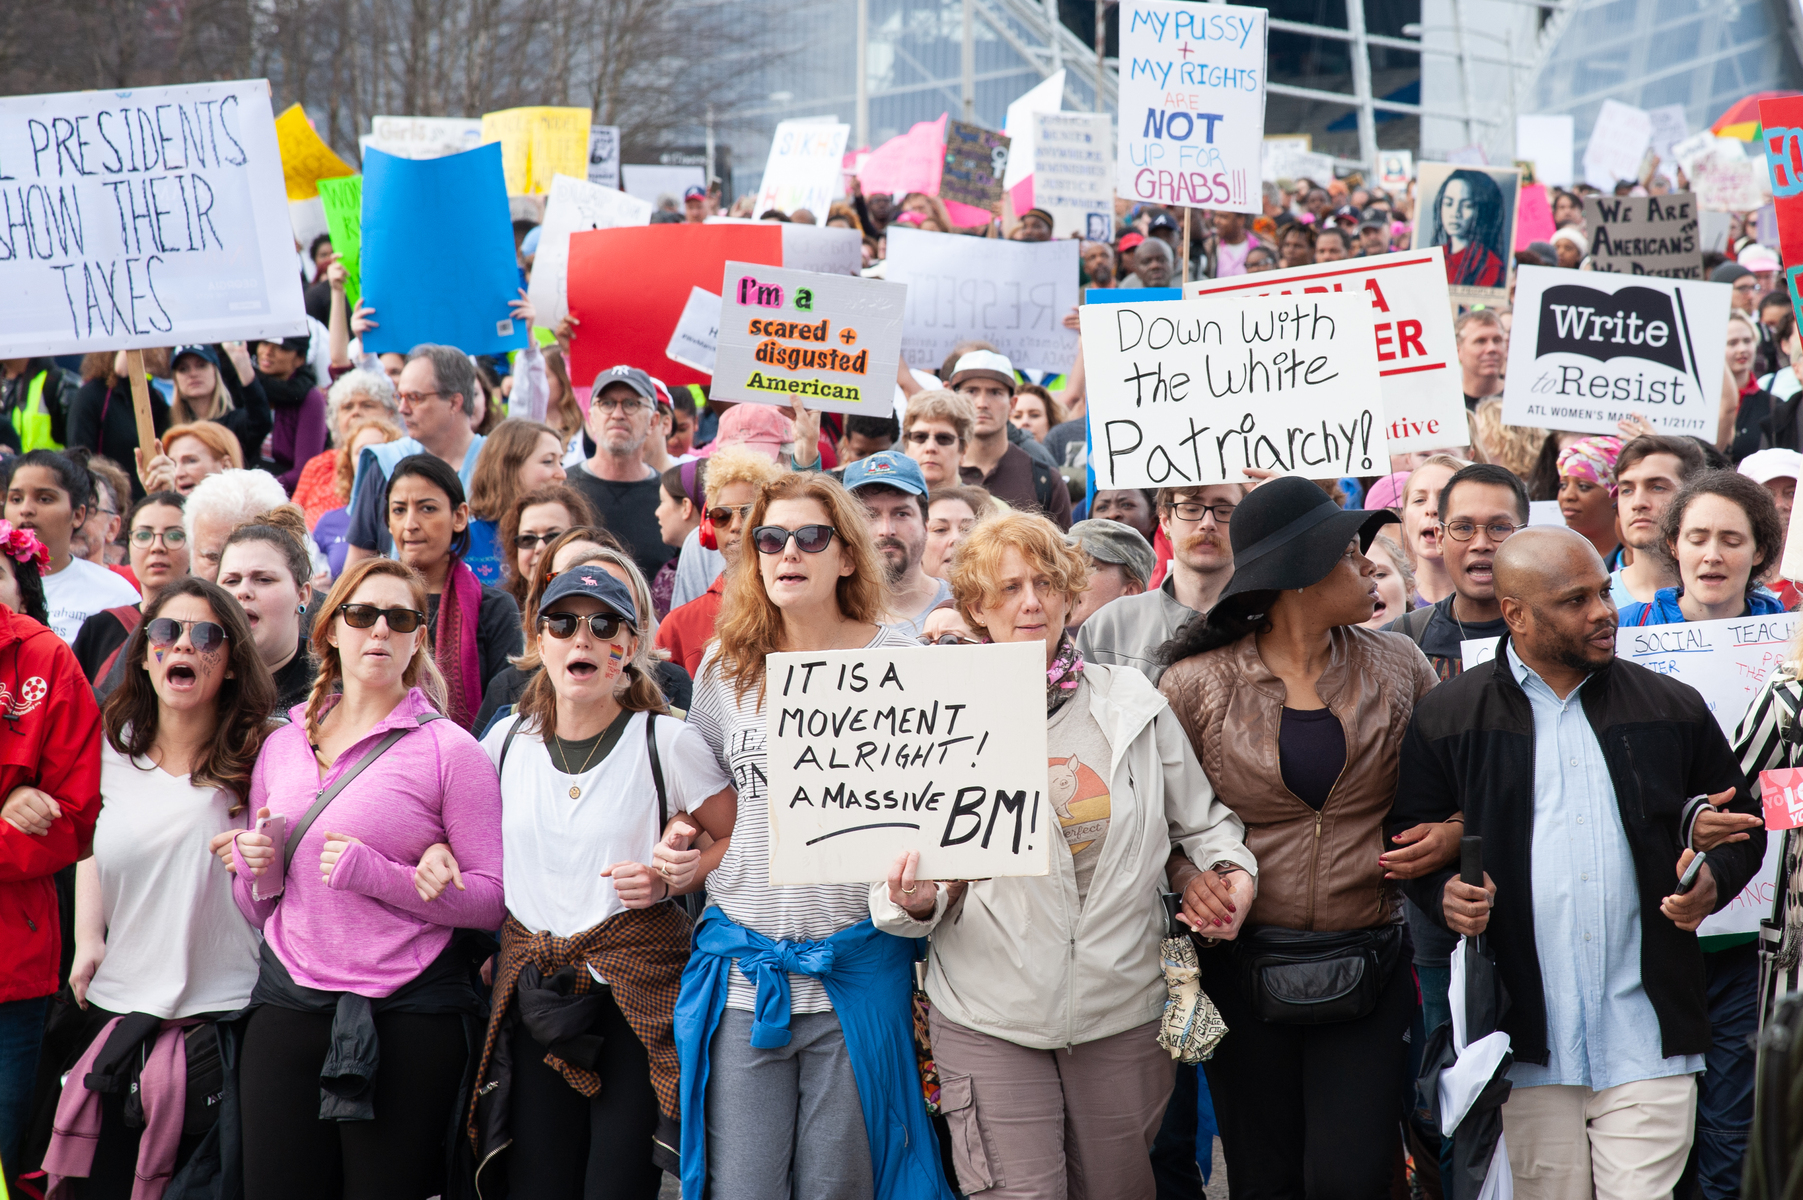 January 21, 2017 - Atlanta, Georgia. An estimate 60,000 demonstrators attended a March for Social Justice and Women.